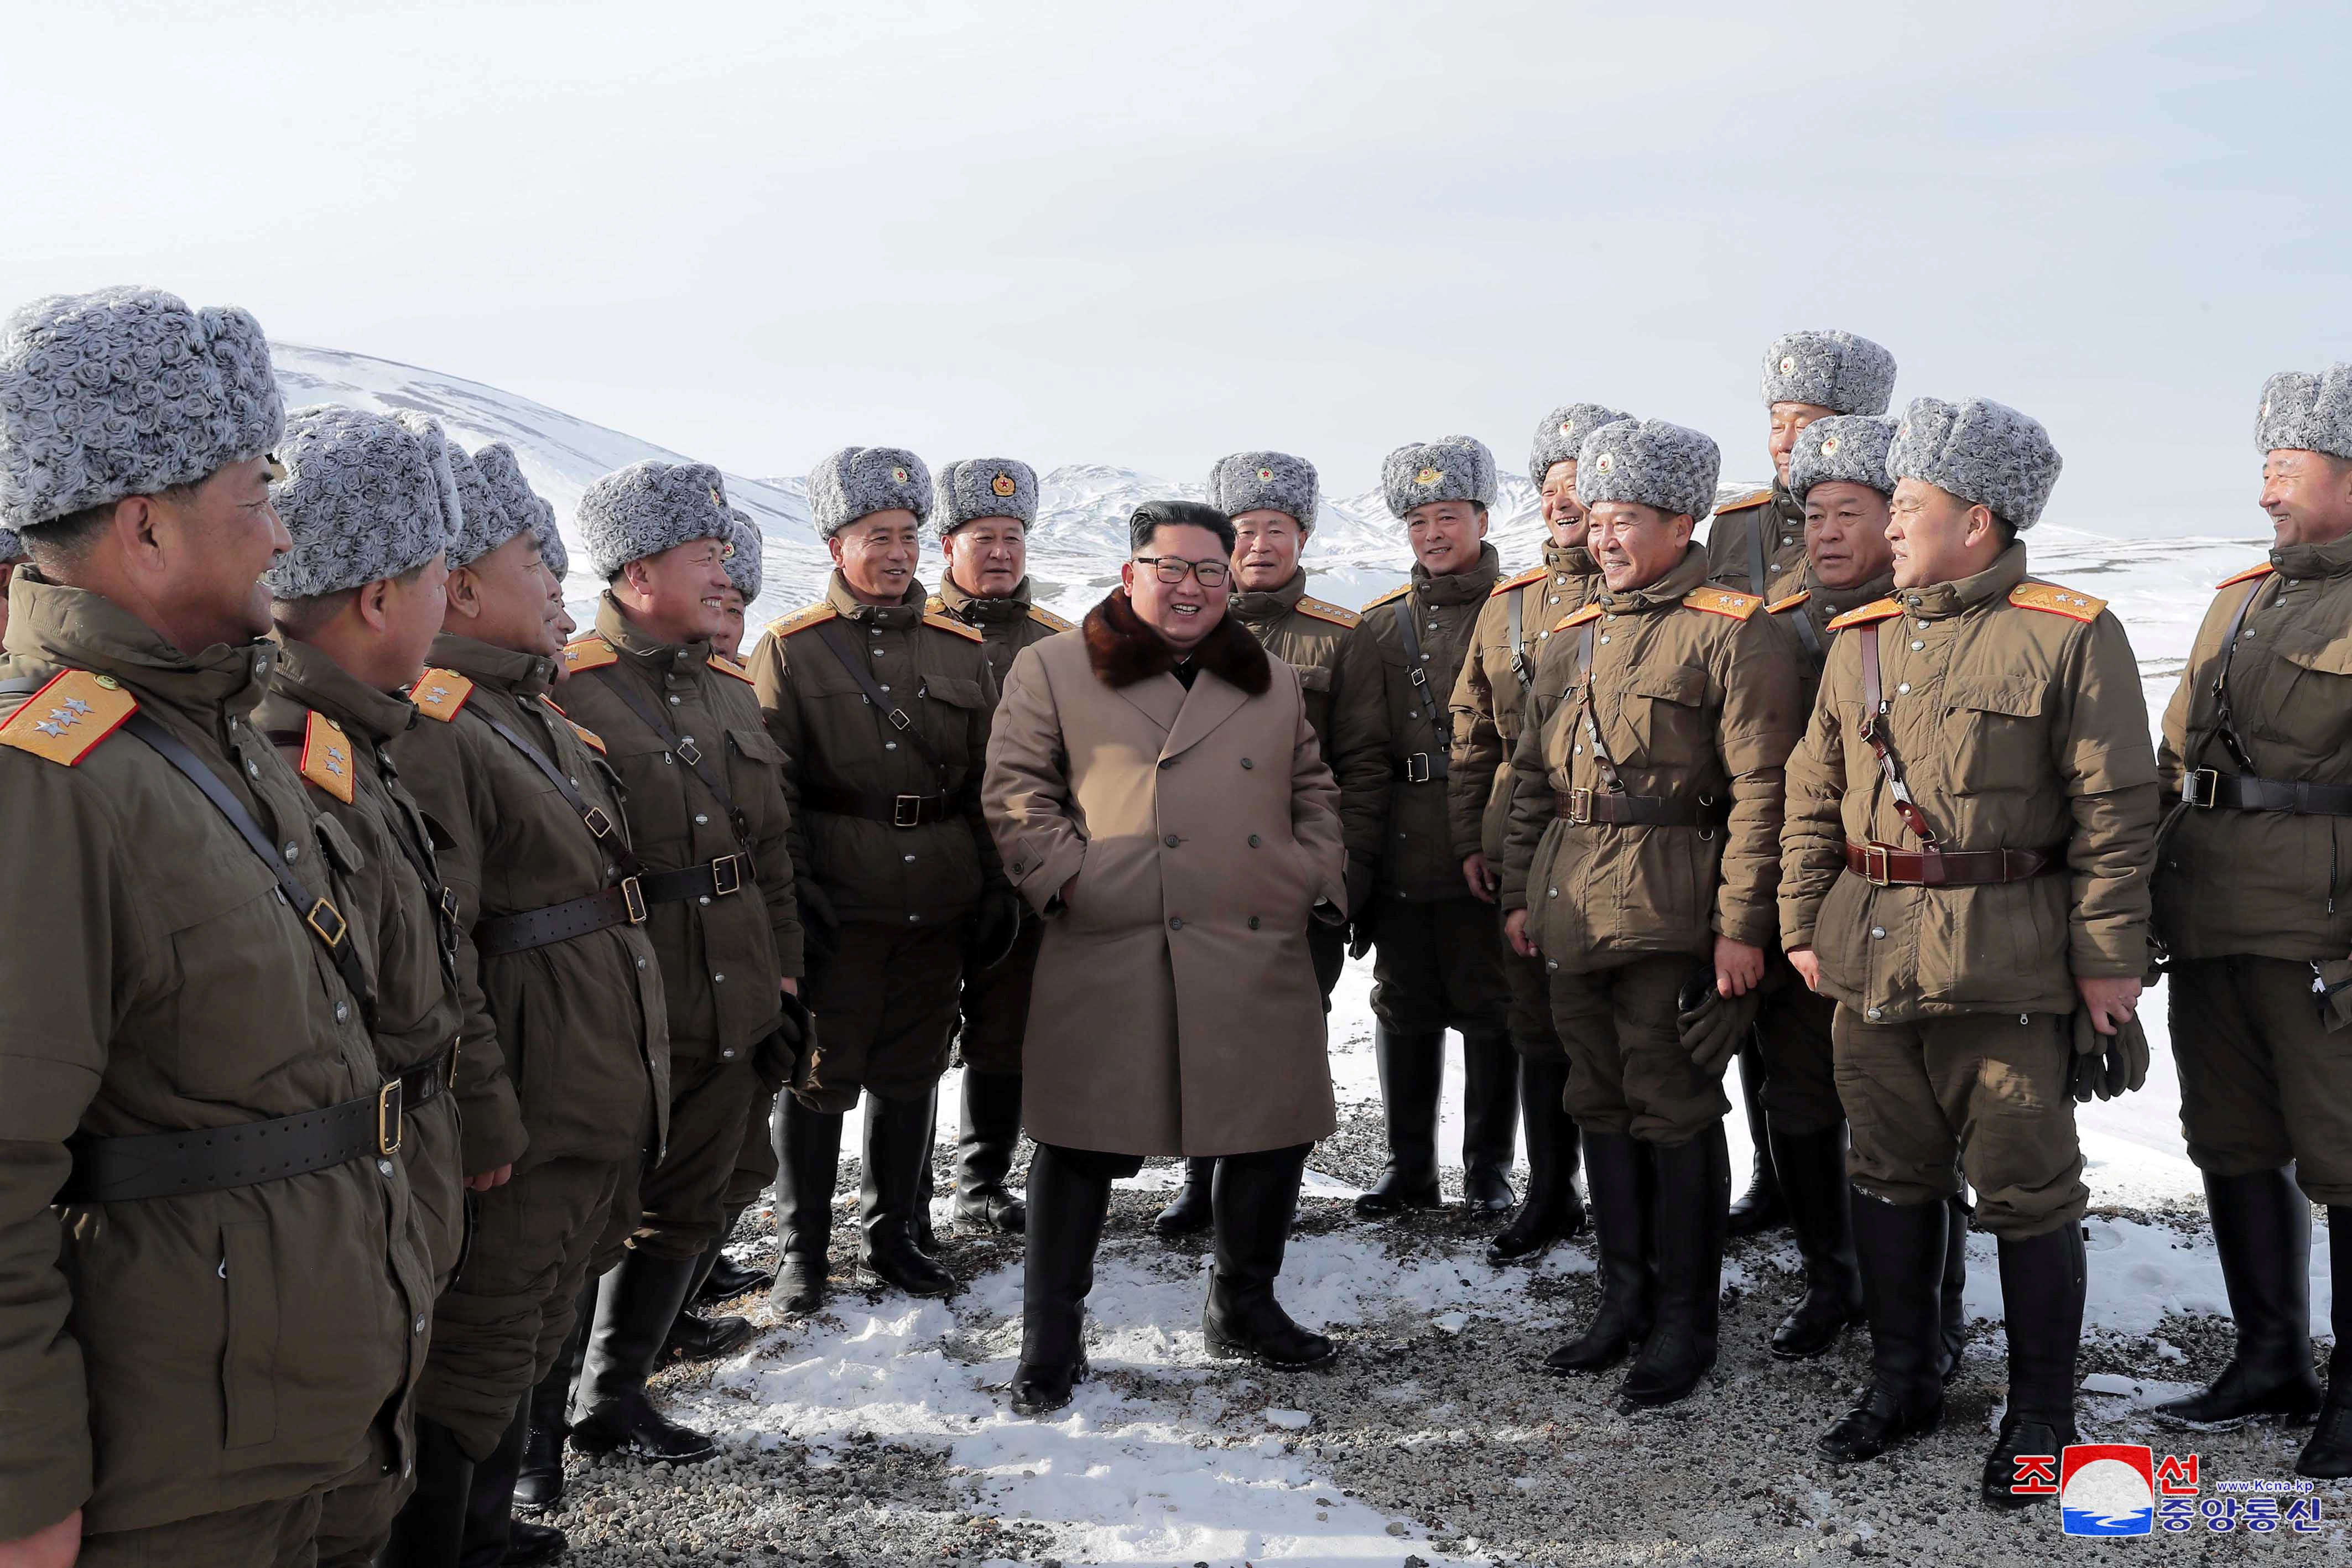 These are the pictures of Kim Jong Un's first public appearance after rumours he was dead